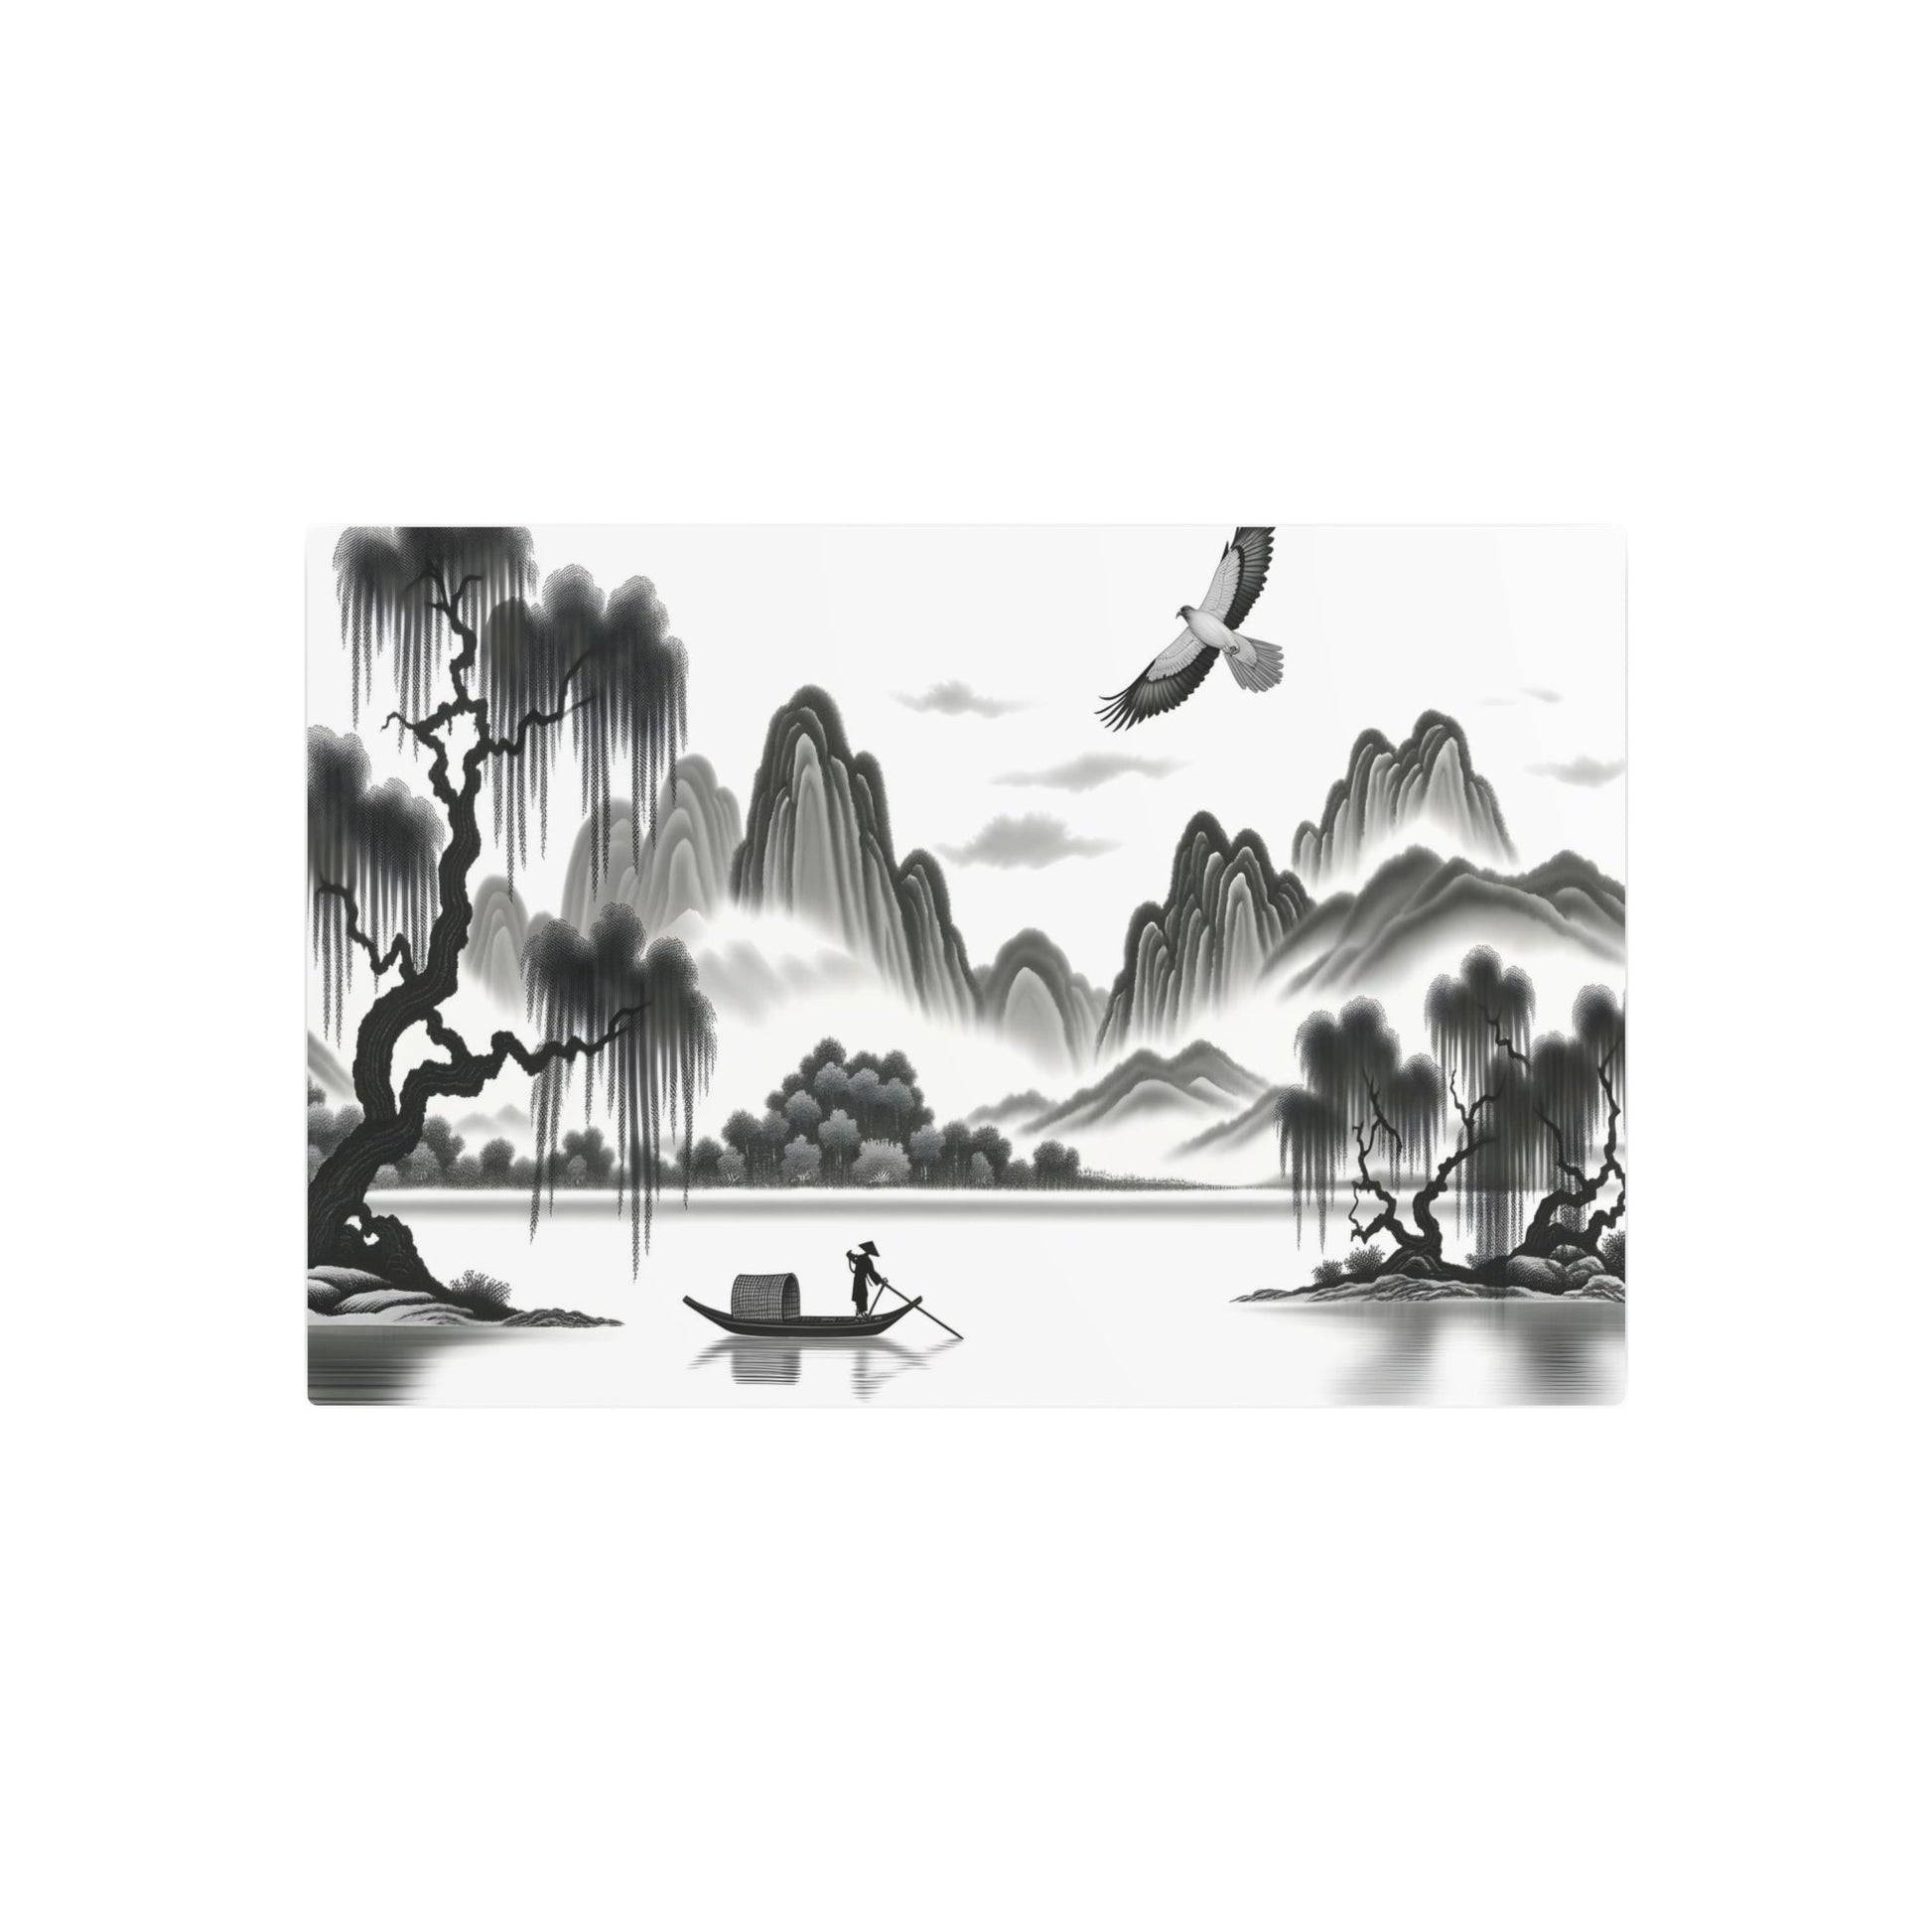 Metal Poster Art | "Harmony in Flight: Traditional Chinese Landscape Painting - Majestic Bird over Serene Lake and Misty Mountains - Minimalist Asian Art in Black, - Metal Poster Art 30″ x 20″ (Horizontal) 0.12''